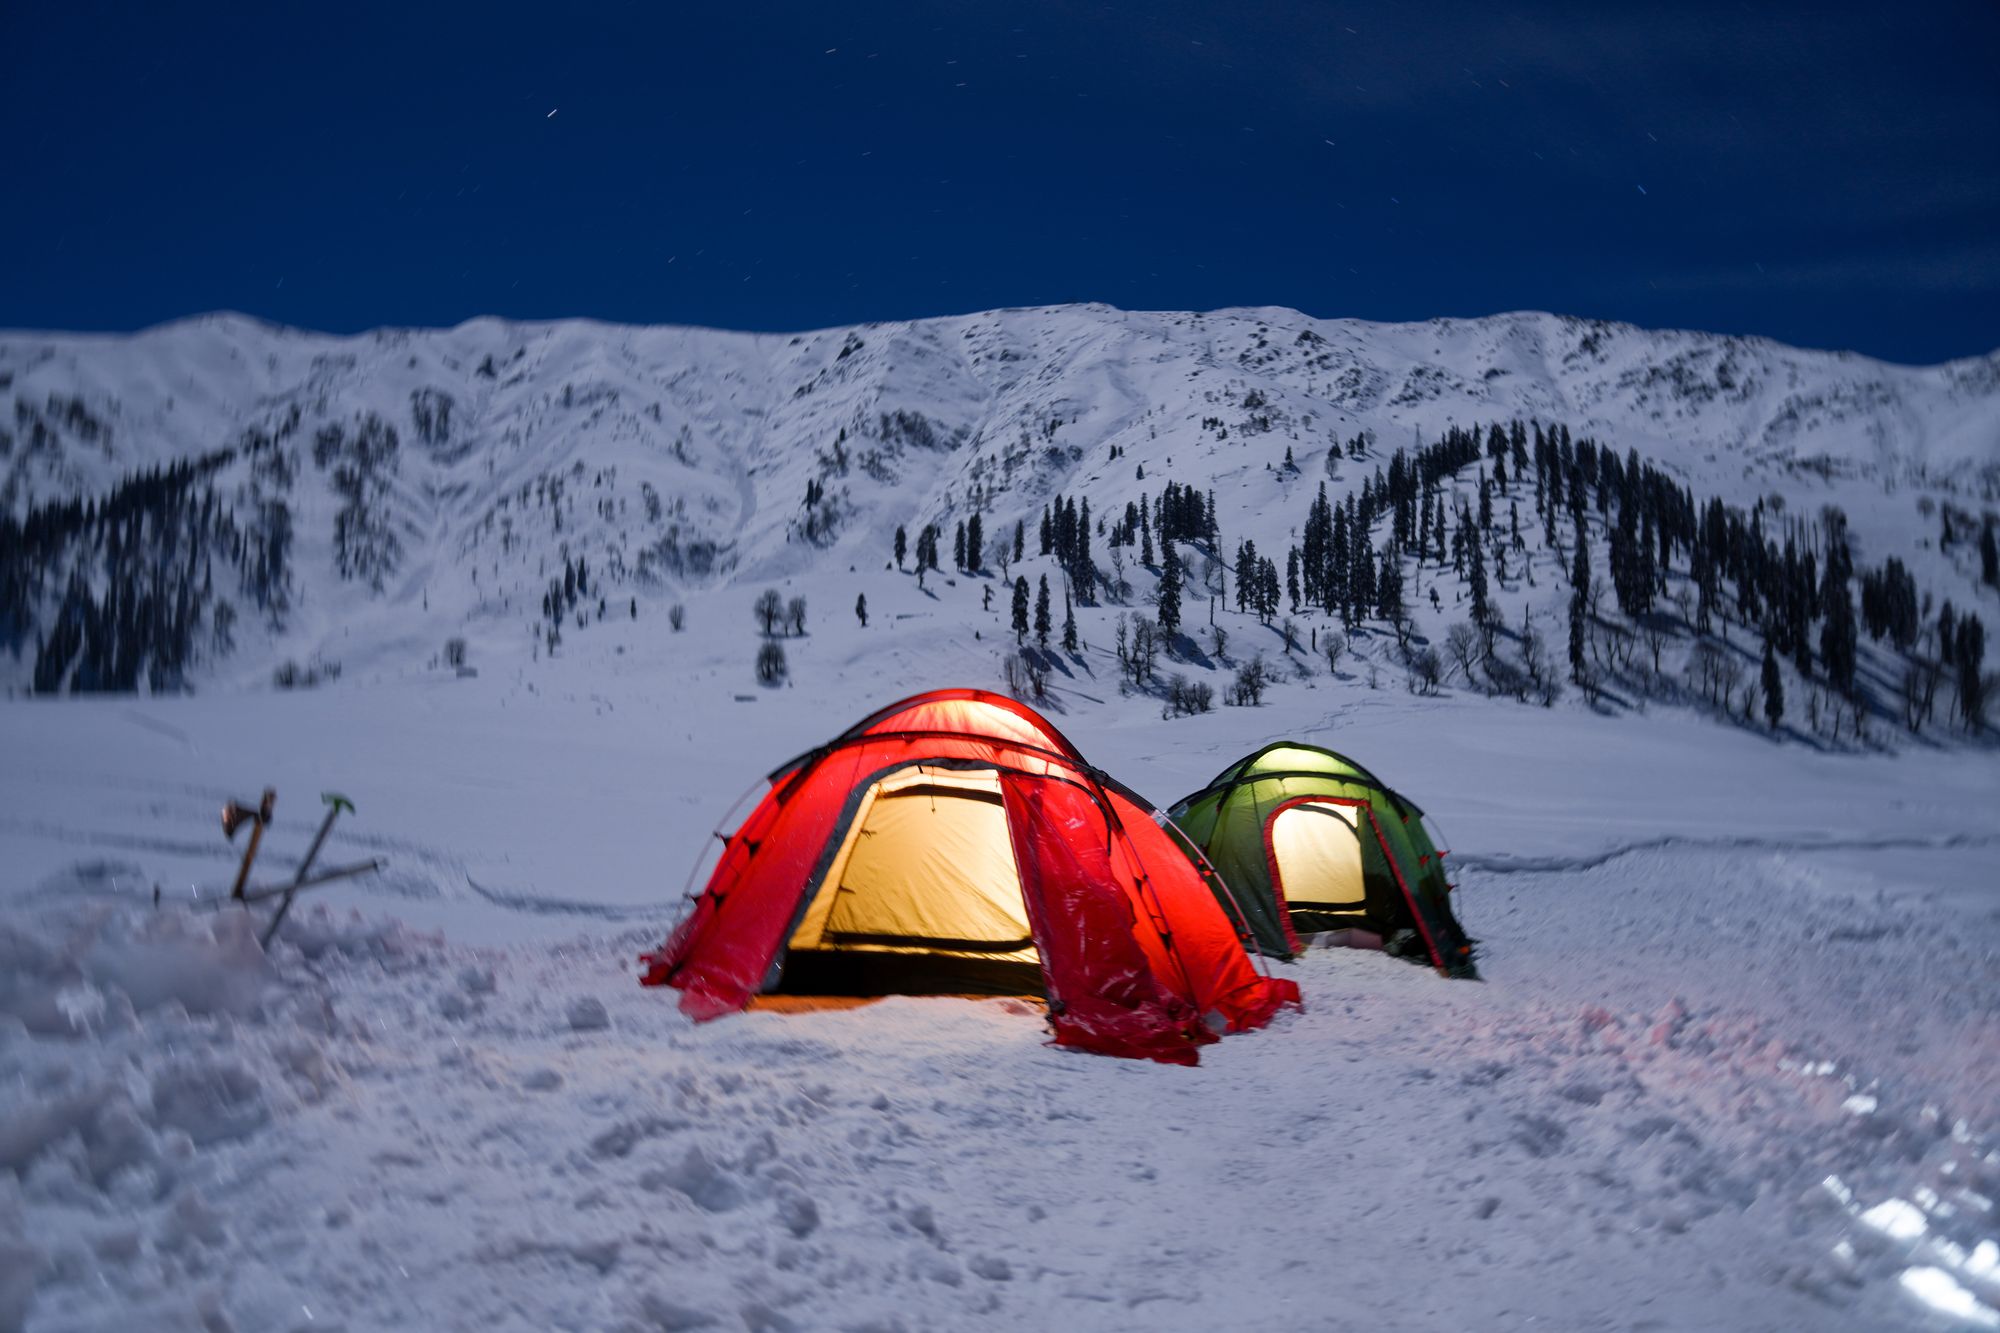 Winter Camping. Tent pictures in Mountain Winter.